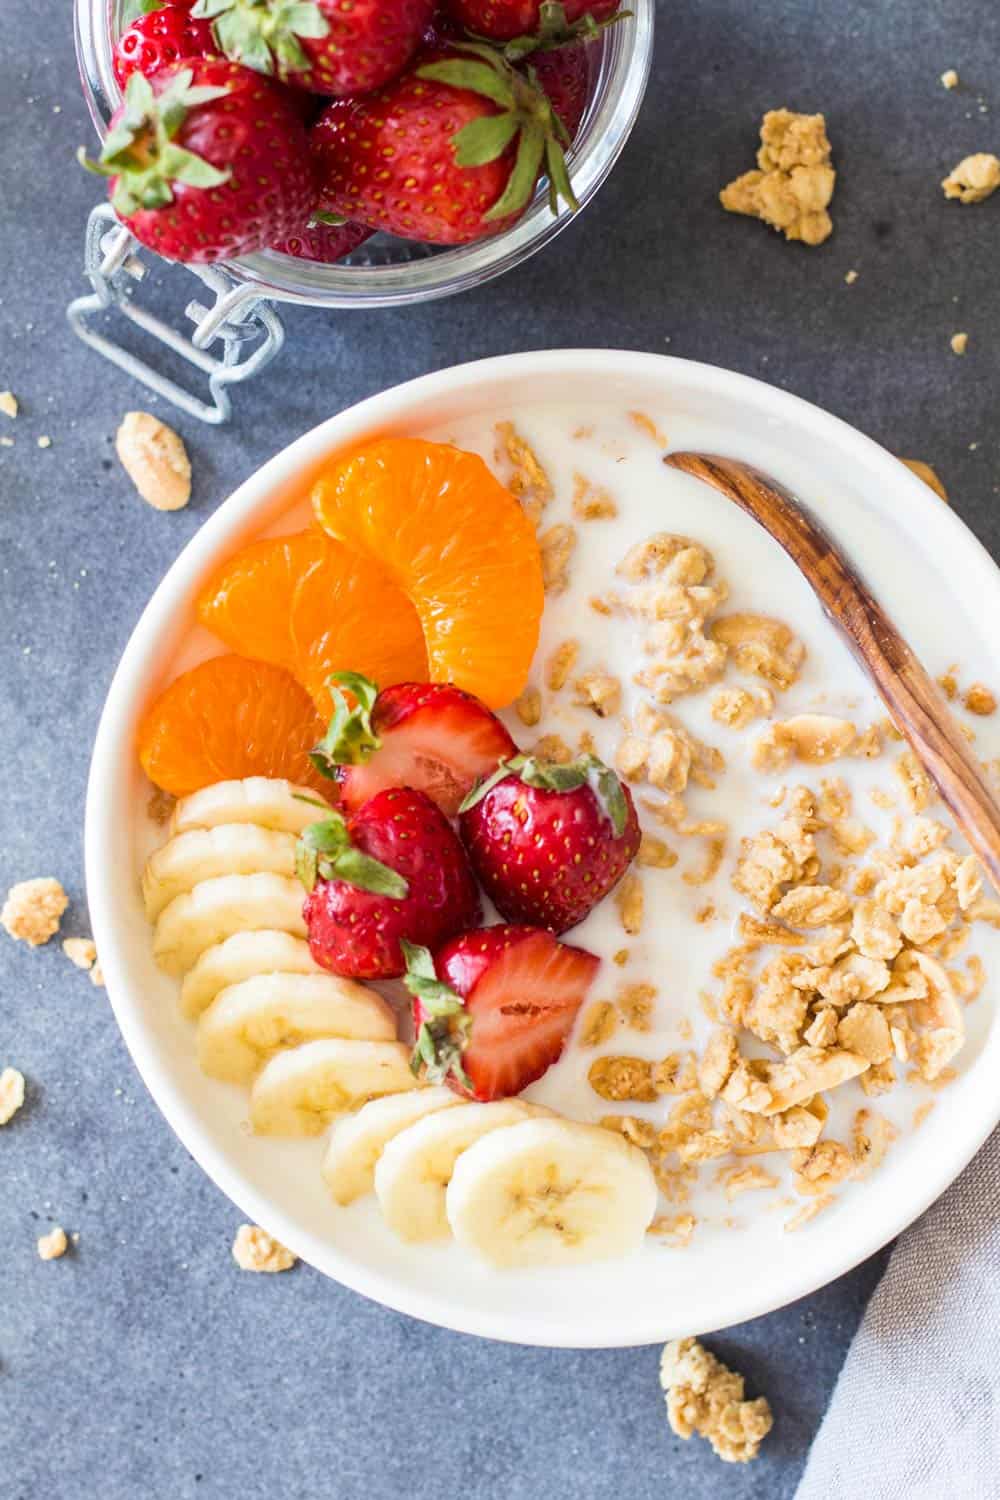 Bowl of Peanut Butter Granola with fruit and milk, and a wooden spoon.